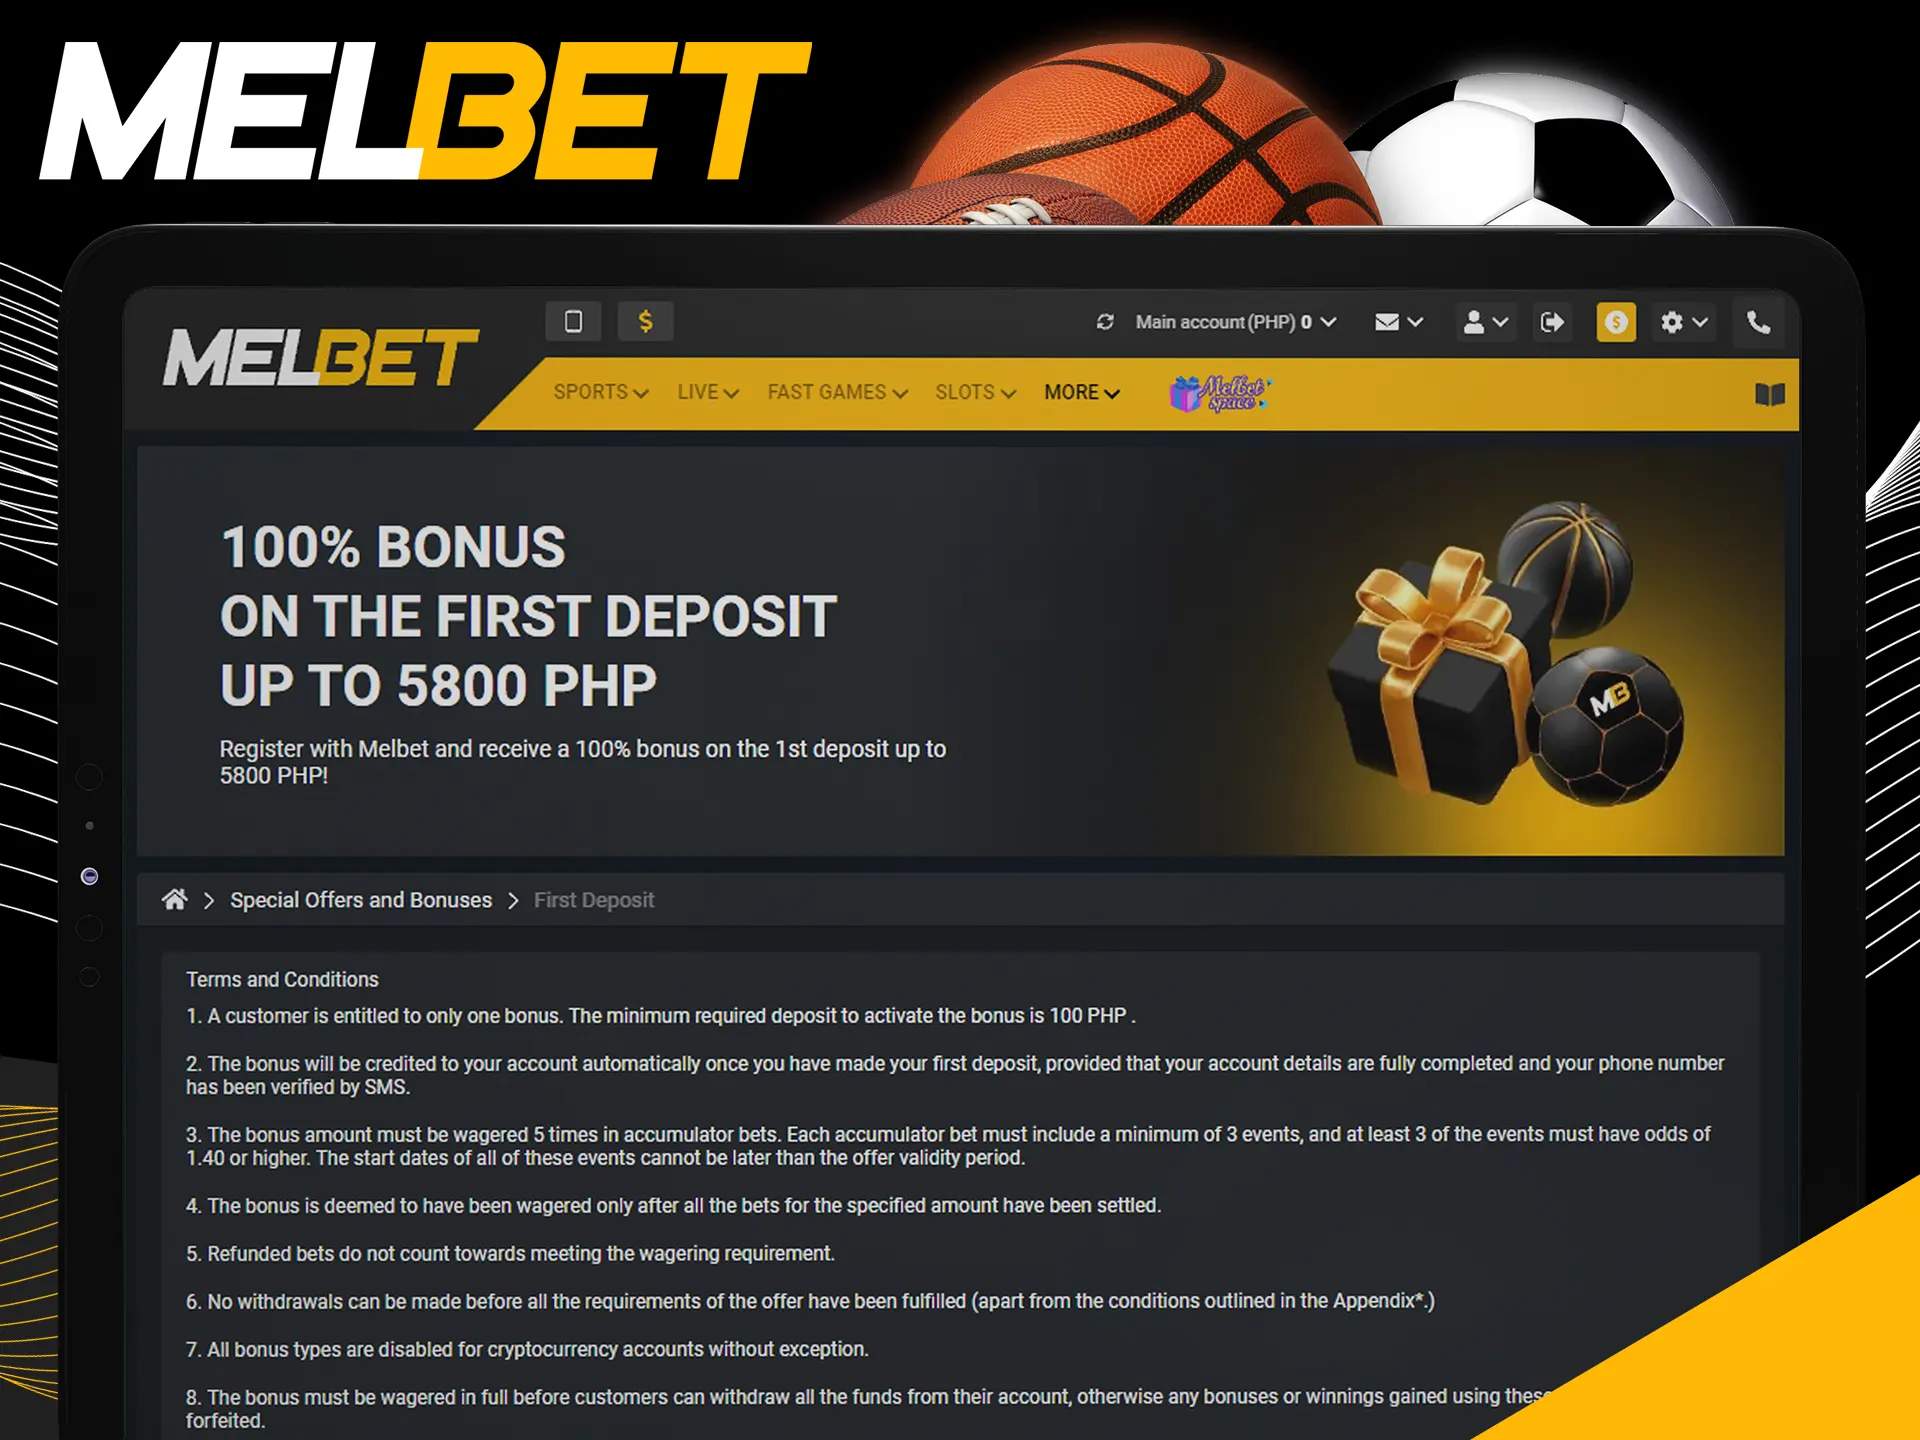 Deposit at Melbet for start betting on sports.